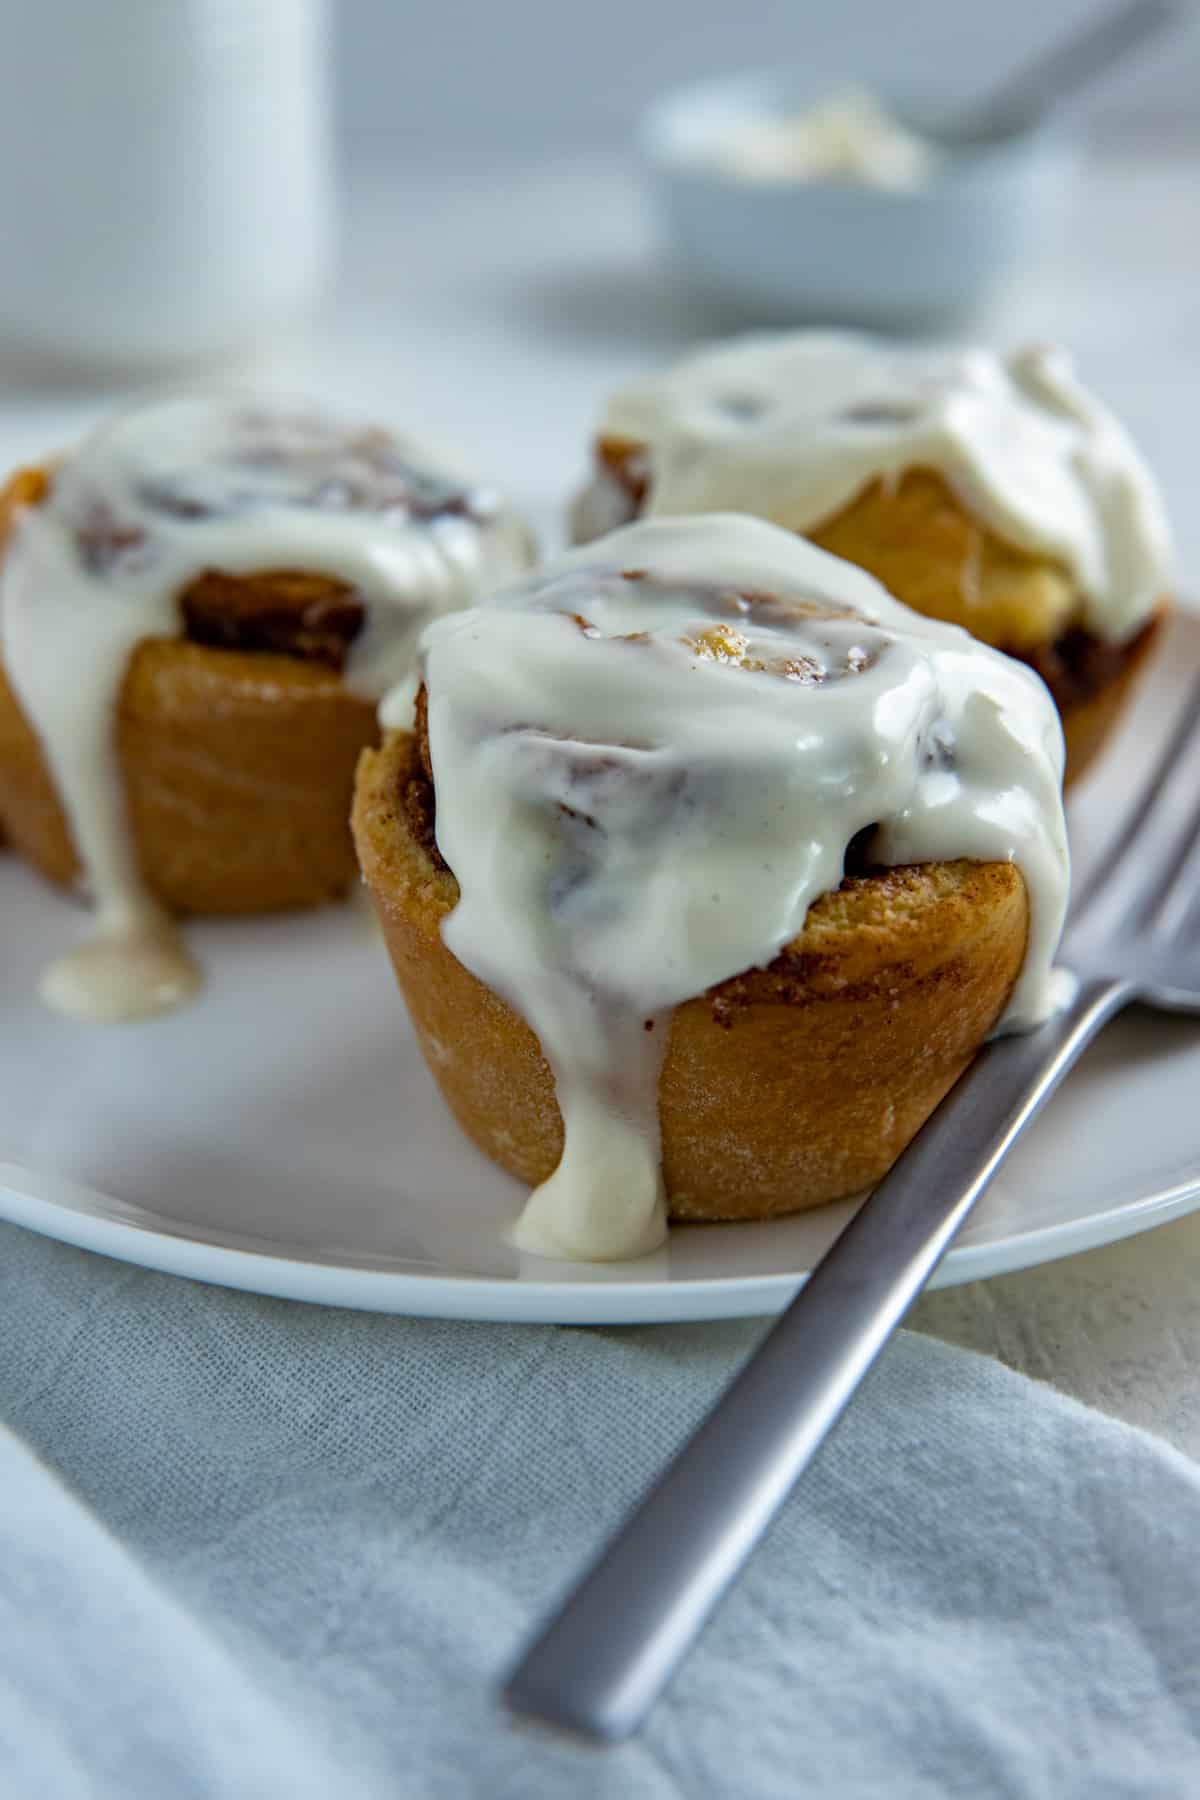 Three baked cinnamon rolls with cream cheese frosting on white round plate with fork.